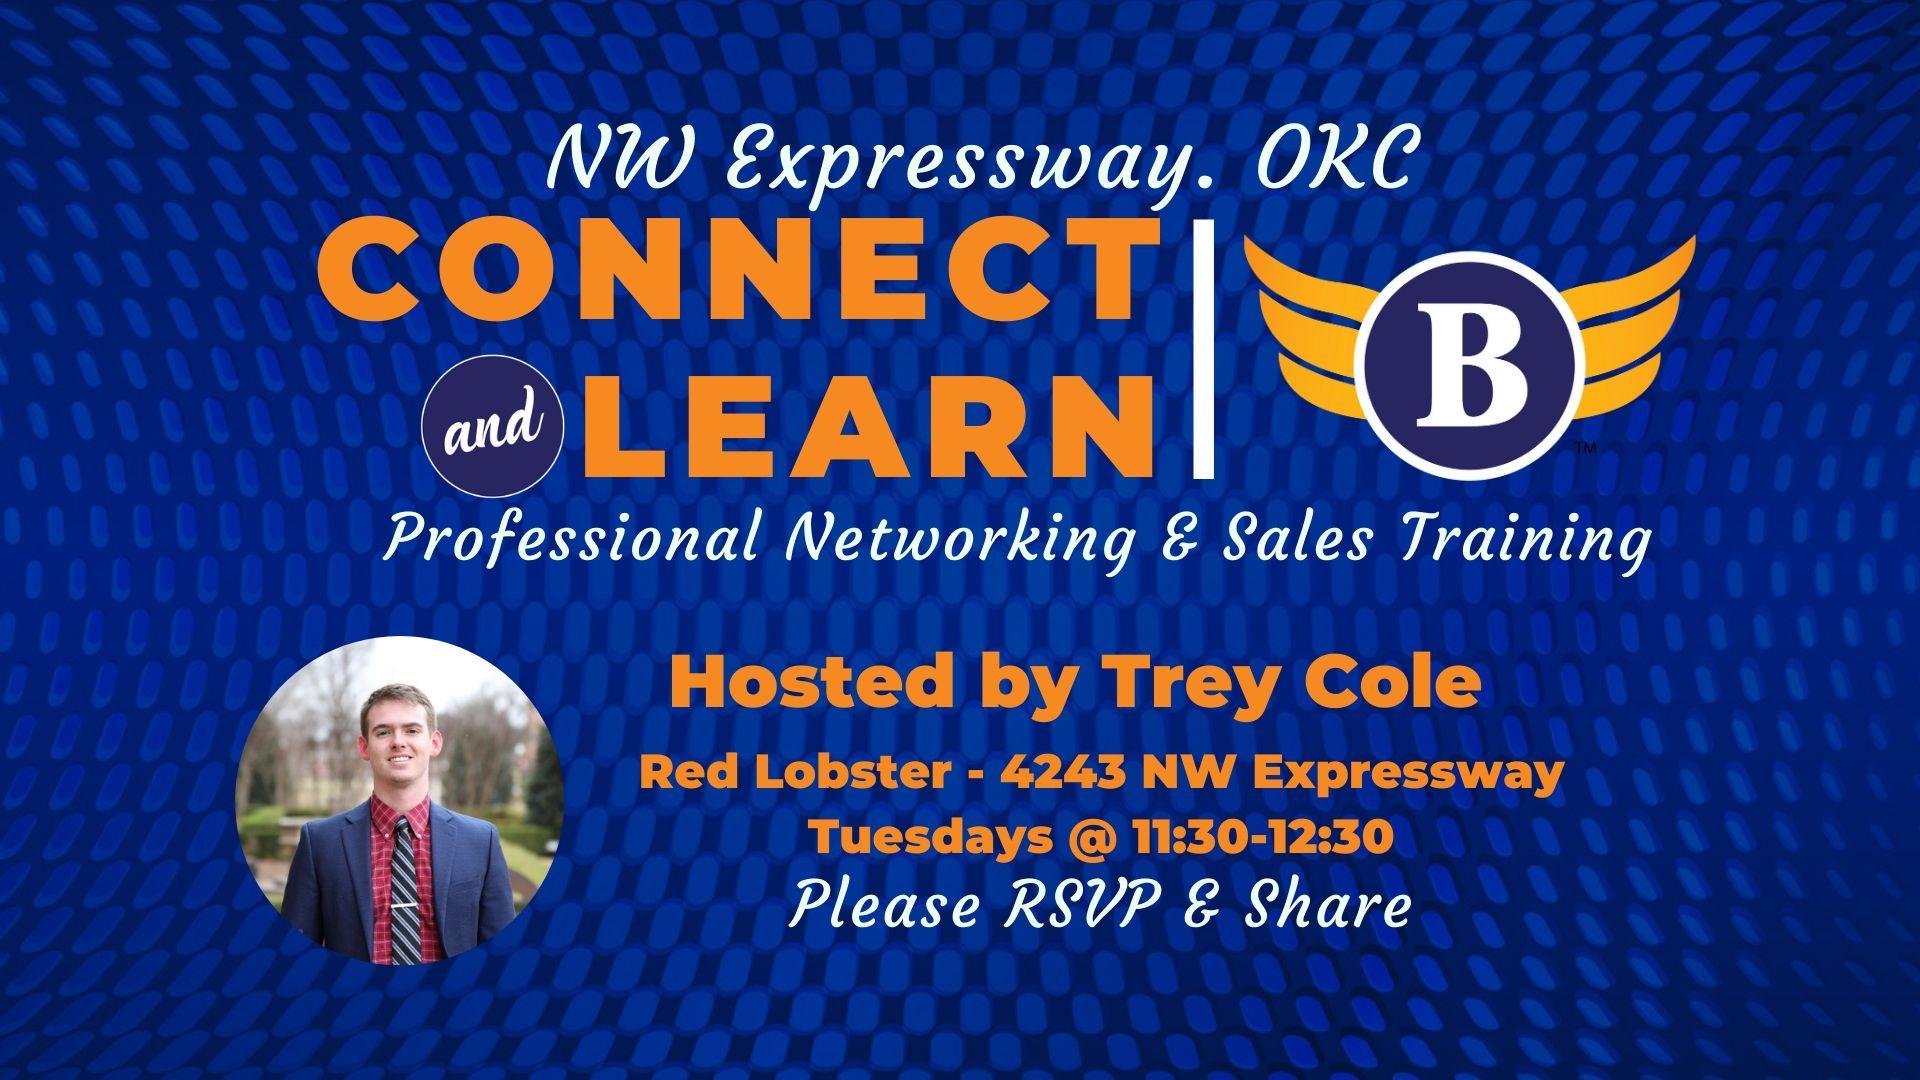 OK | OKC - NW Expressway Networking and Sales Training